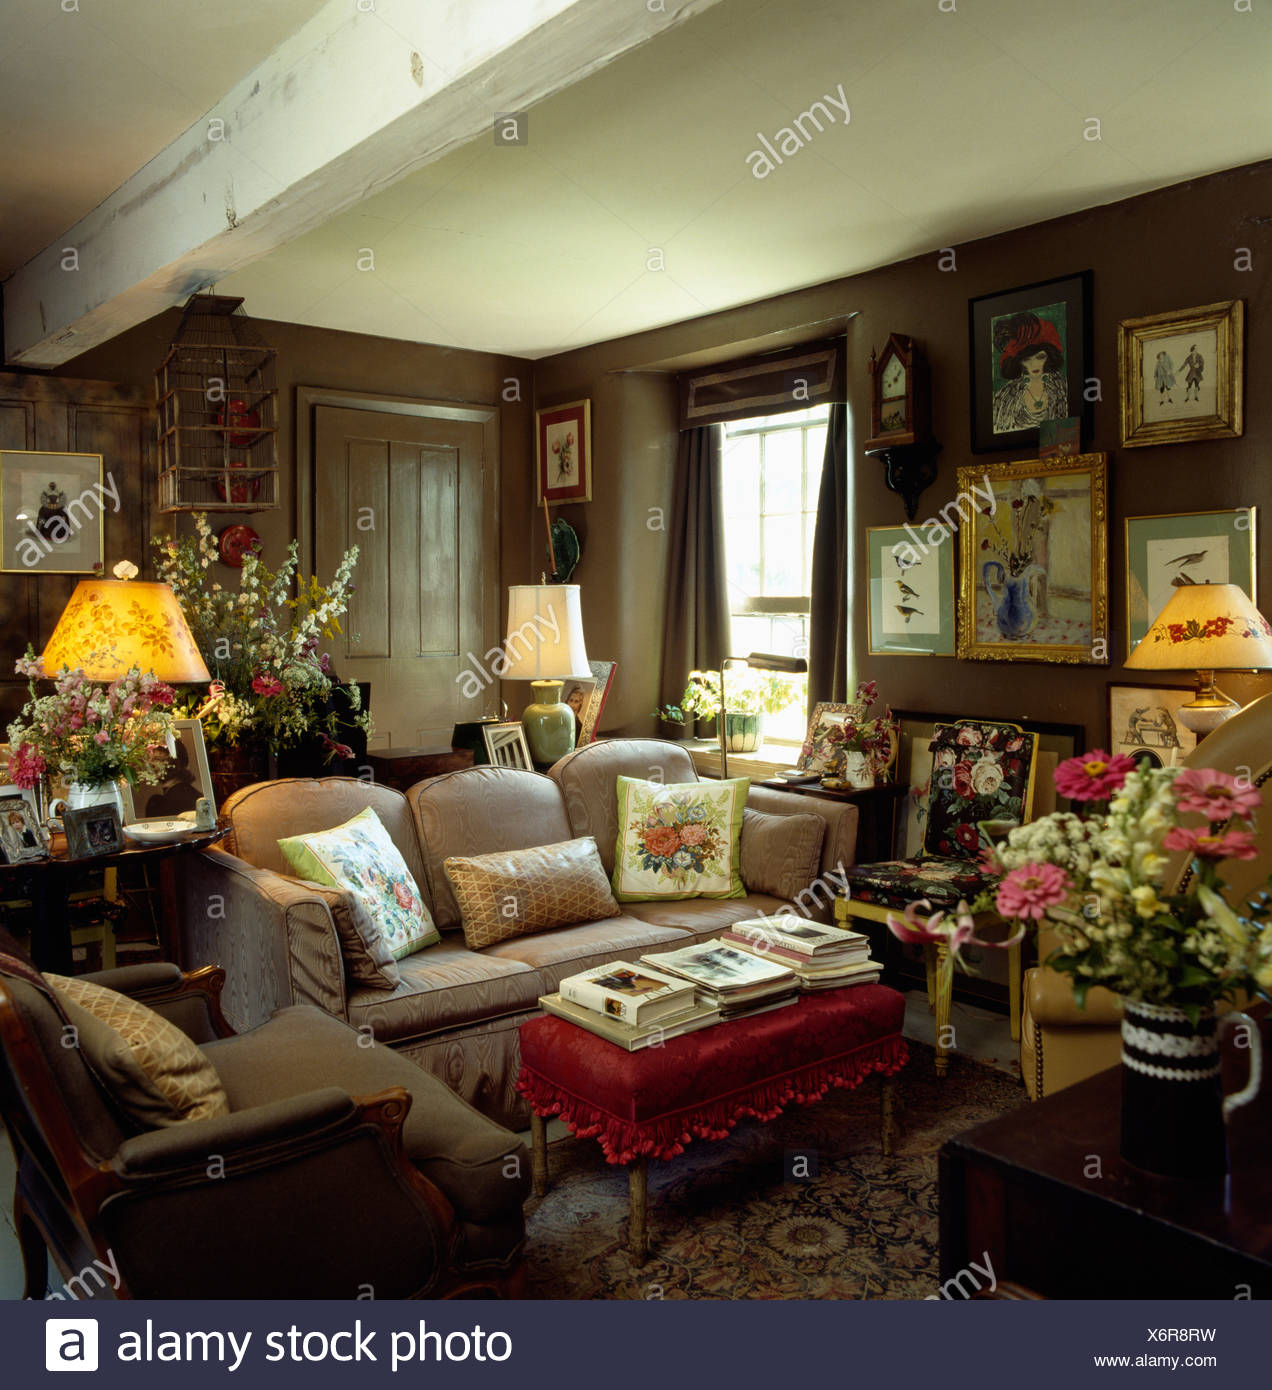 Lighted Lamps And Pictures On Walls Of Brown Country Livingroom